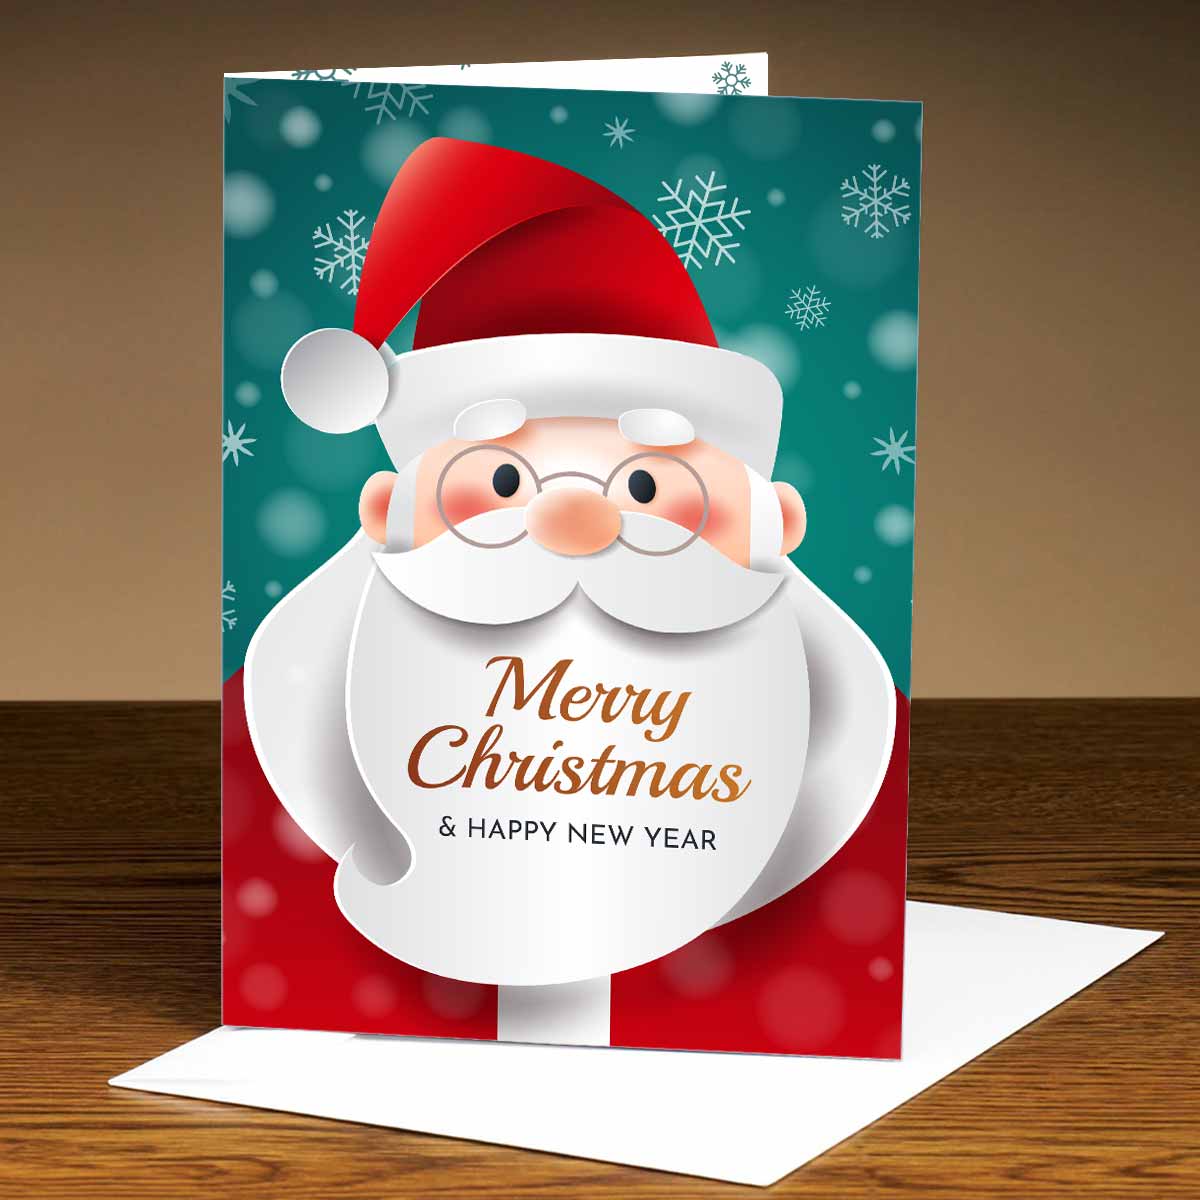 Merry Xmas & New Year Wishes Card